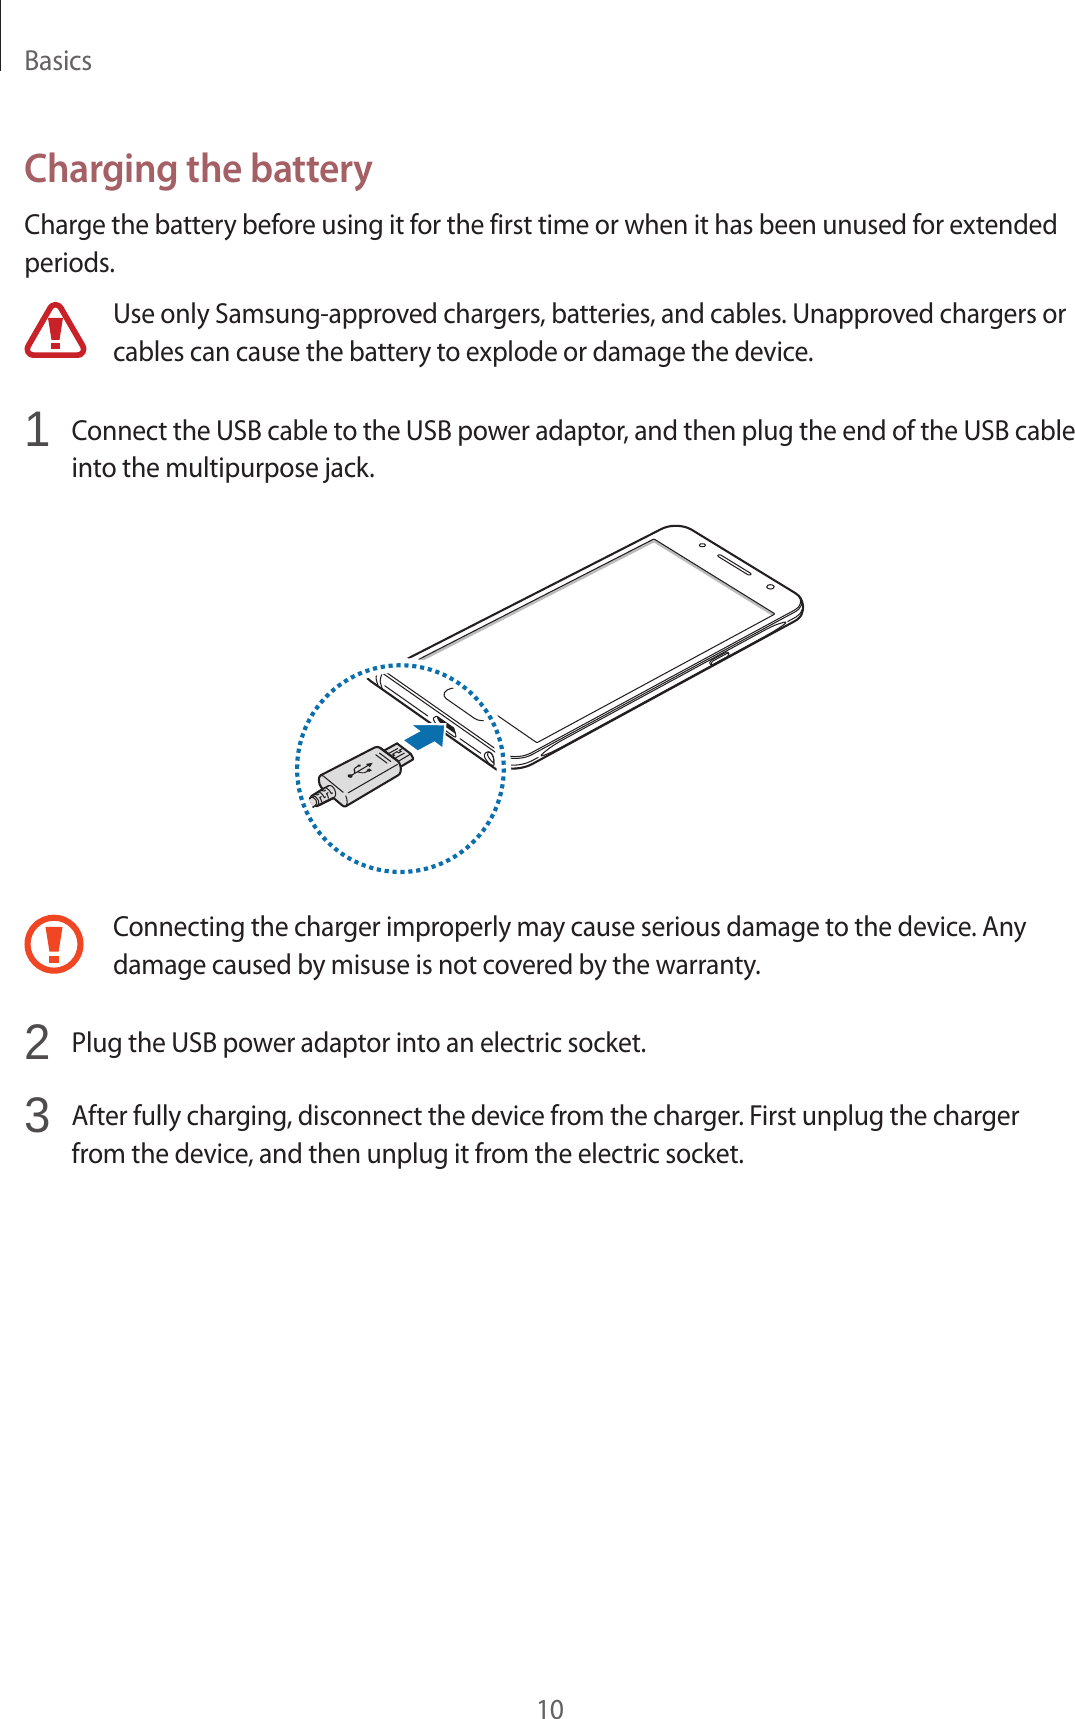 Basics10Charging the batteryCharge the battery before using it for the first time or when it has been unused for extended periods.Use only Samsung-approved chargers, batteries, and cables. Unapproved chargers or cables can cause the battery to explode or damage the device.1  Connect the USB cable to the USB power adaptor, and then plug the end of the USB cable into the multipurpose jack.Connecting the charger improperly may cause serious damage to the device. Any damage caused by misuse is not covered by the warranty.2  Plug the USB power adaptor into an electric socket.3  After fully charging, disconnect the device from the charger. First unplug the charger from the device, and then unplug it from the electric socket.